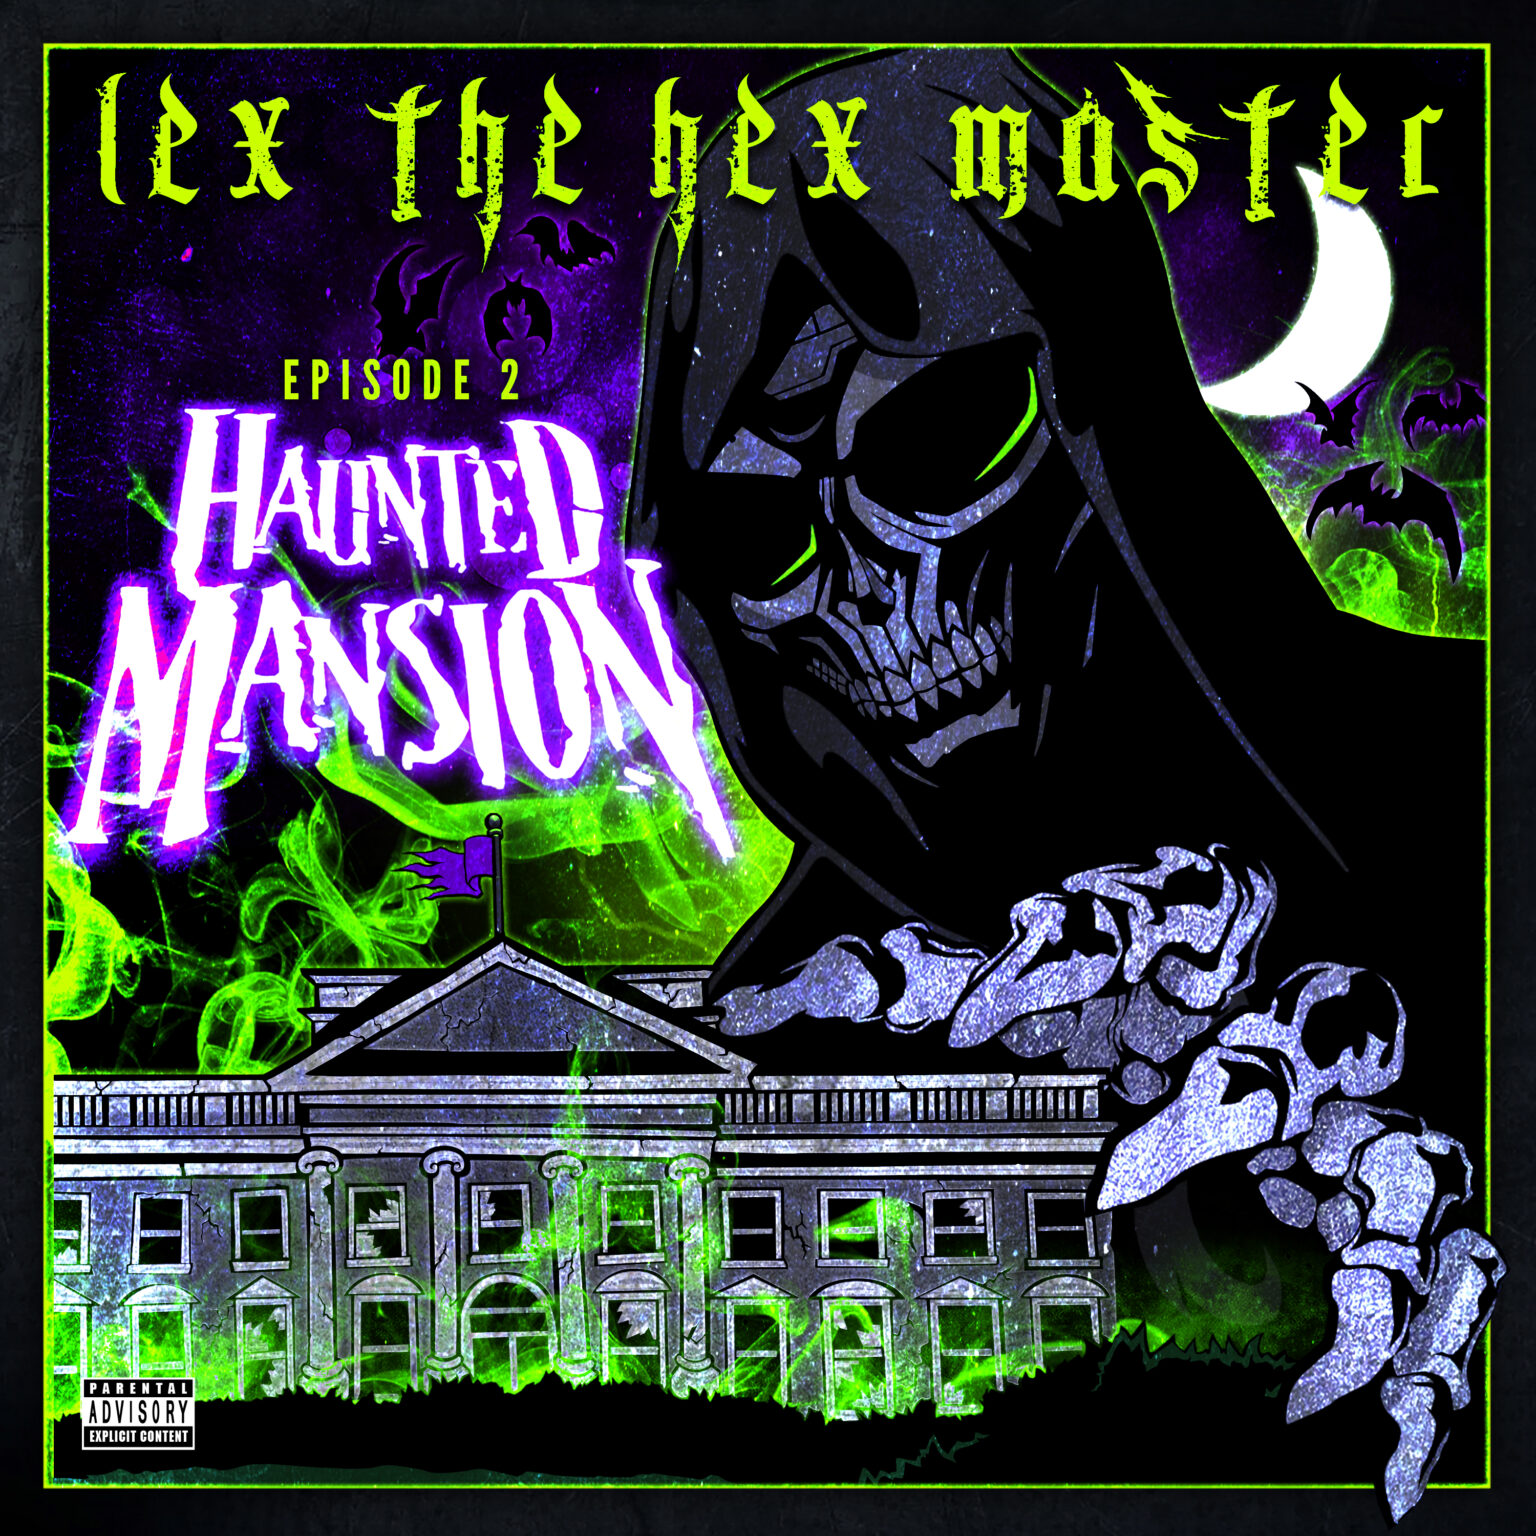 Haunted mansion 2. Lex the hex Haunted Mansion. Lex the hex Master Episode 3. The hex Vicious Galaxy. The hex отзывы.